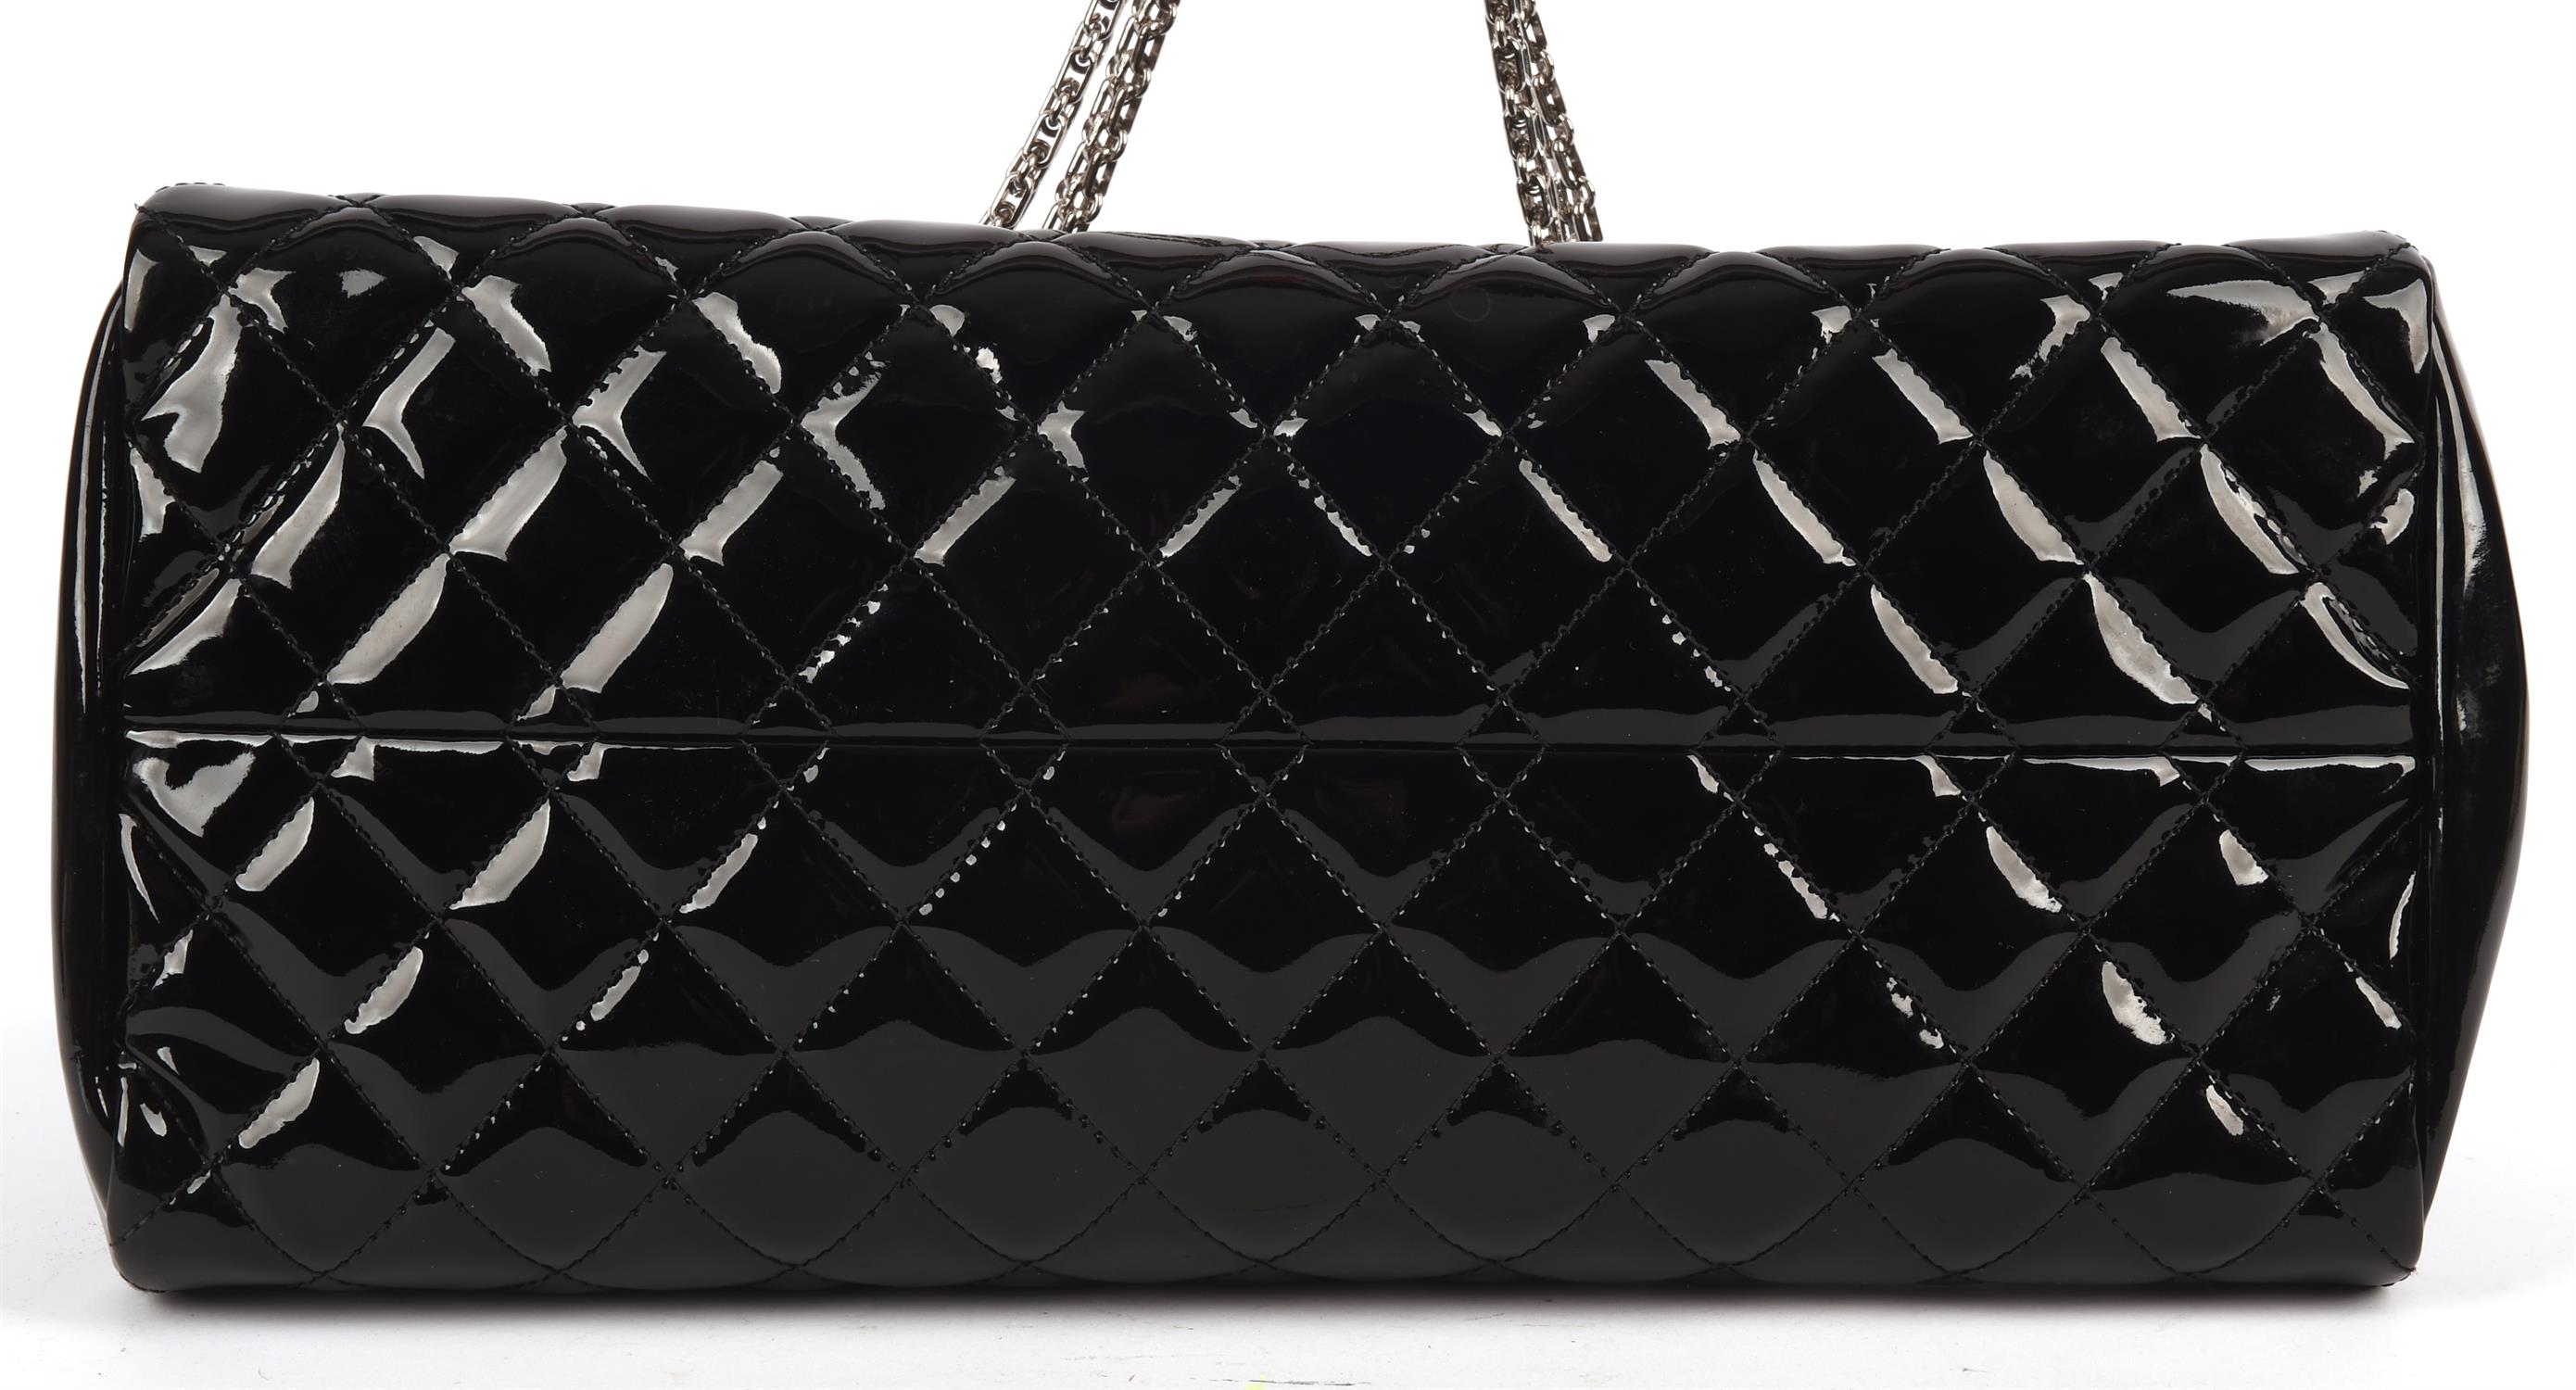 CHANEL quilted black patent Mademoiselle handbag with silver hardware and burgundy canvas interior. - Image 6 of 8